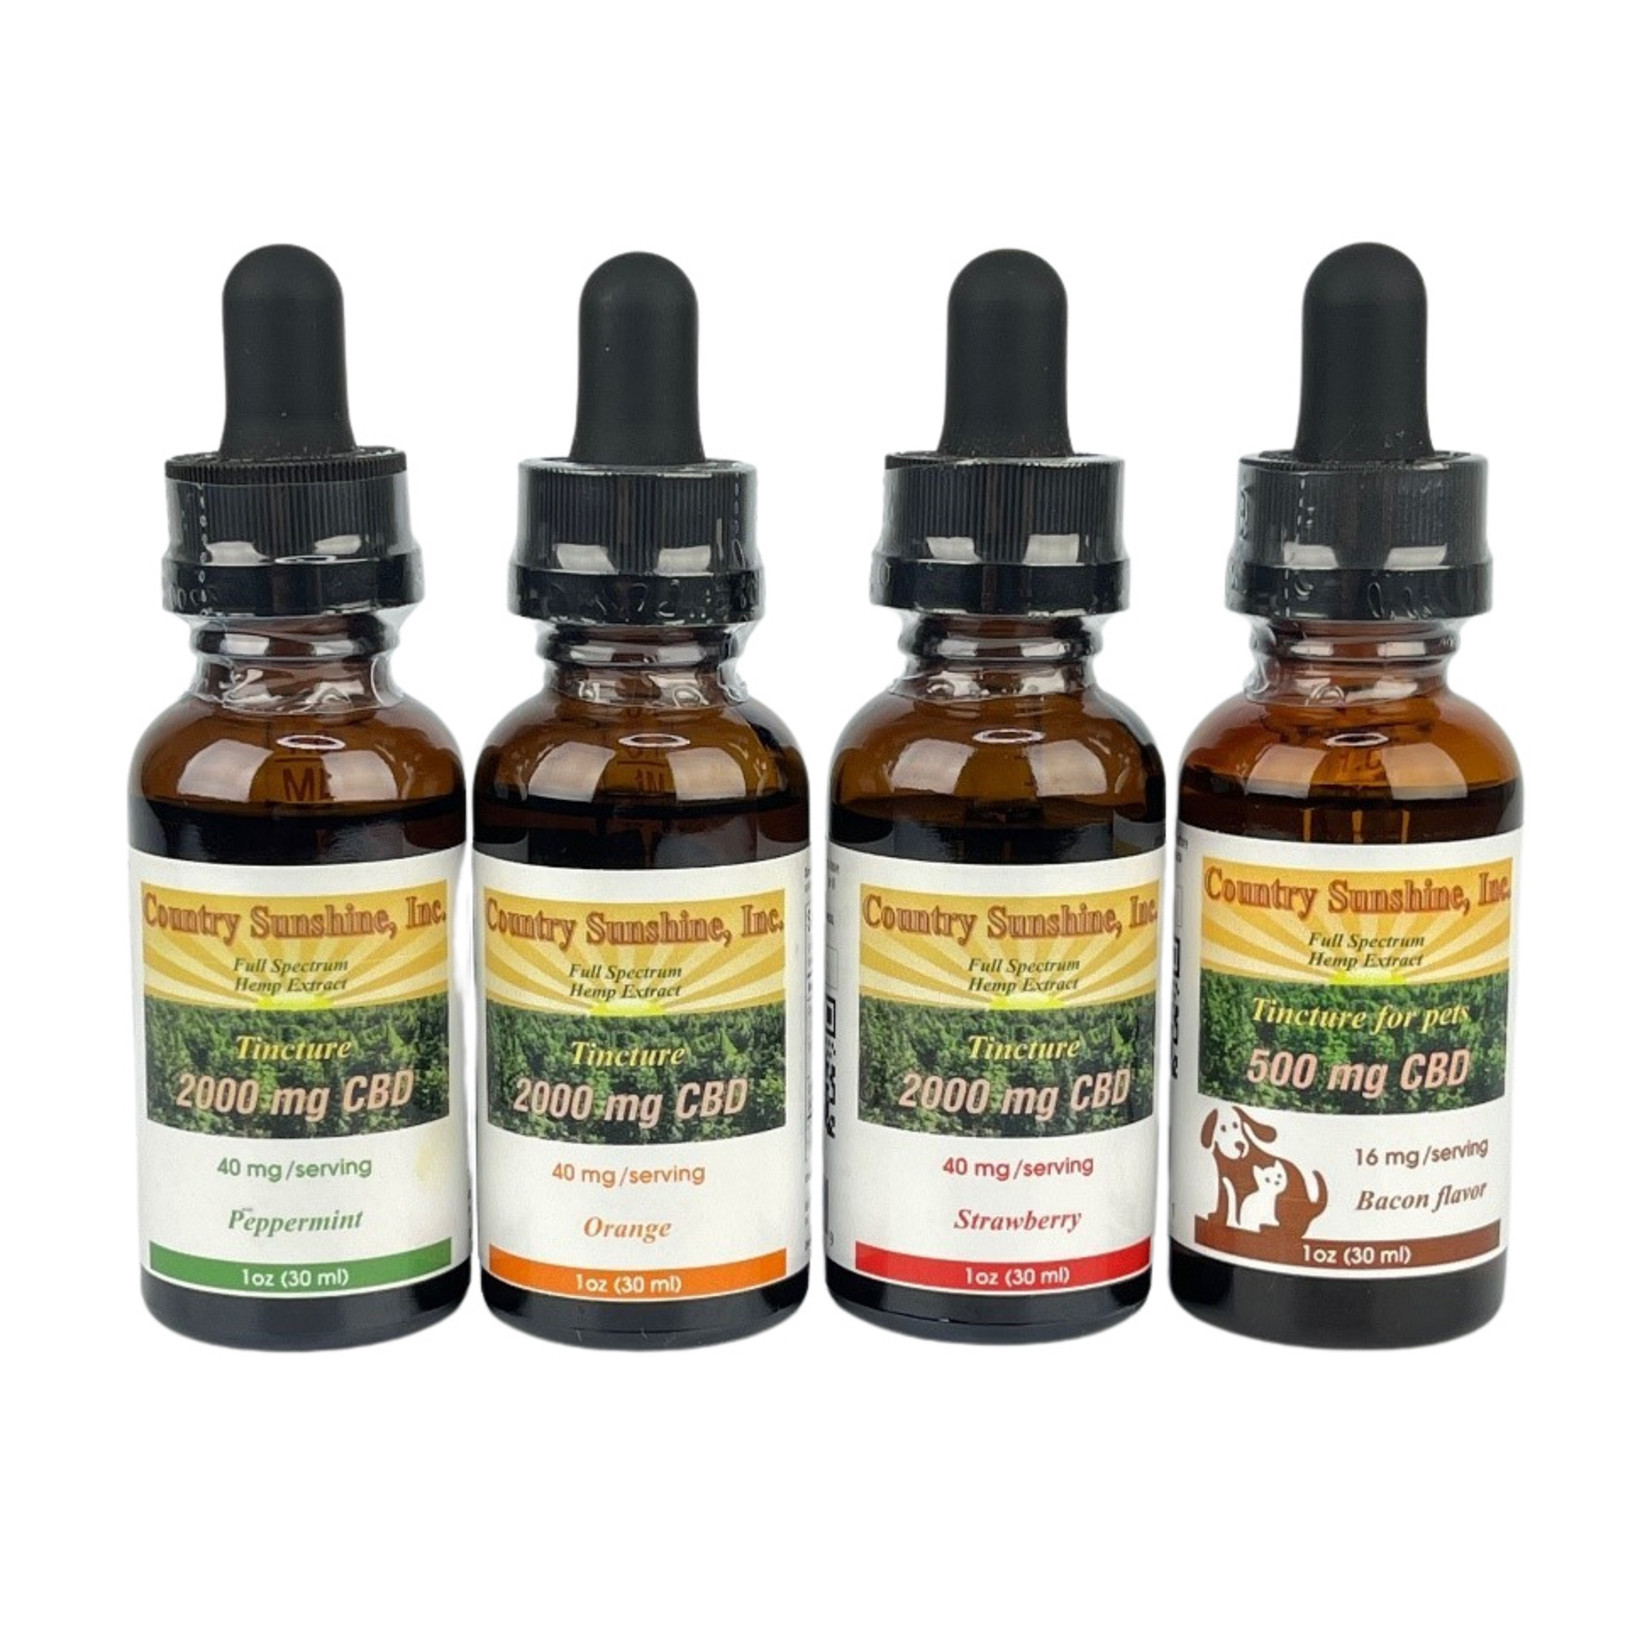 Country Sunshine Country Sunshine, Inc. CBD Tincture for Pets